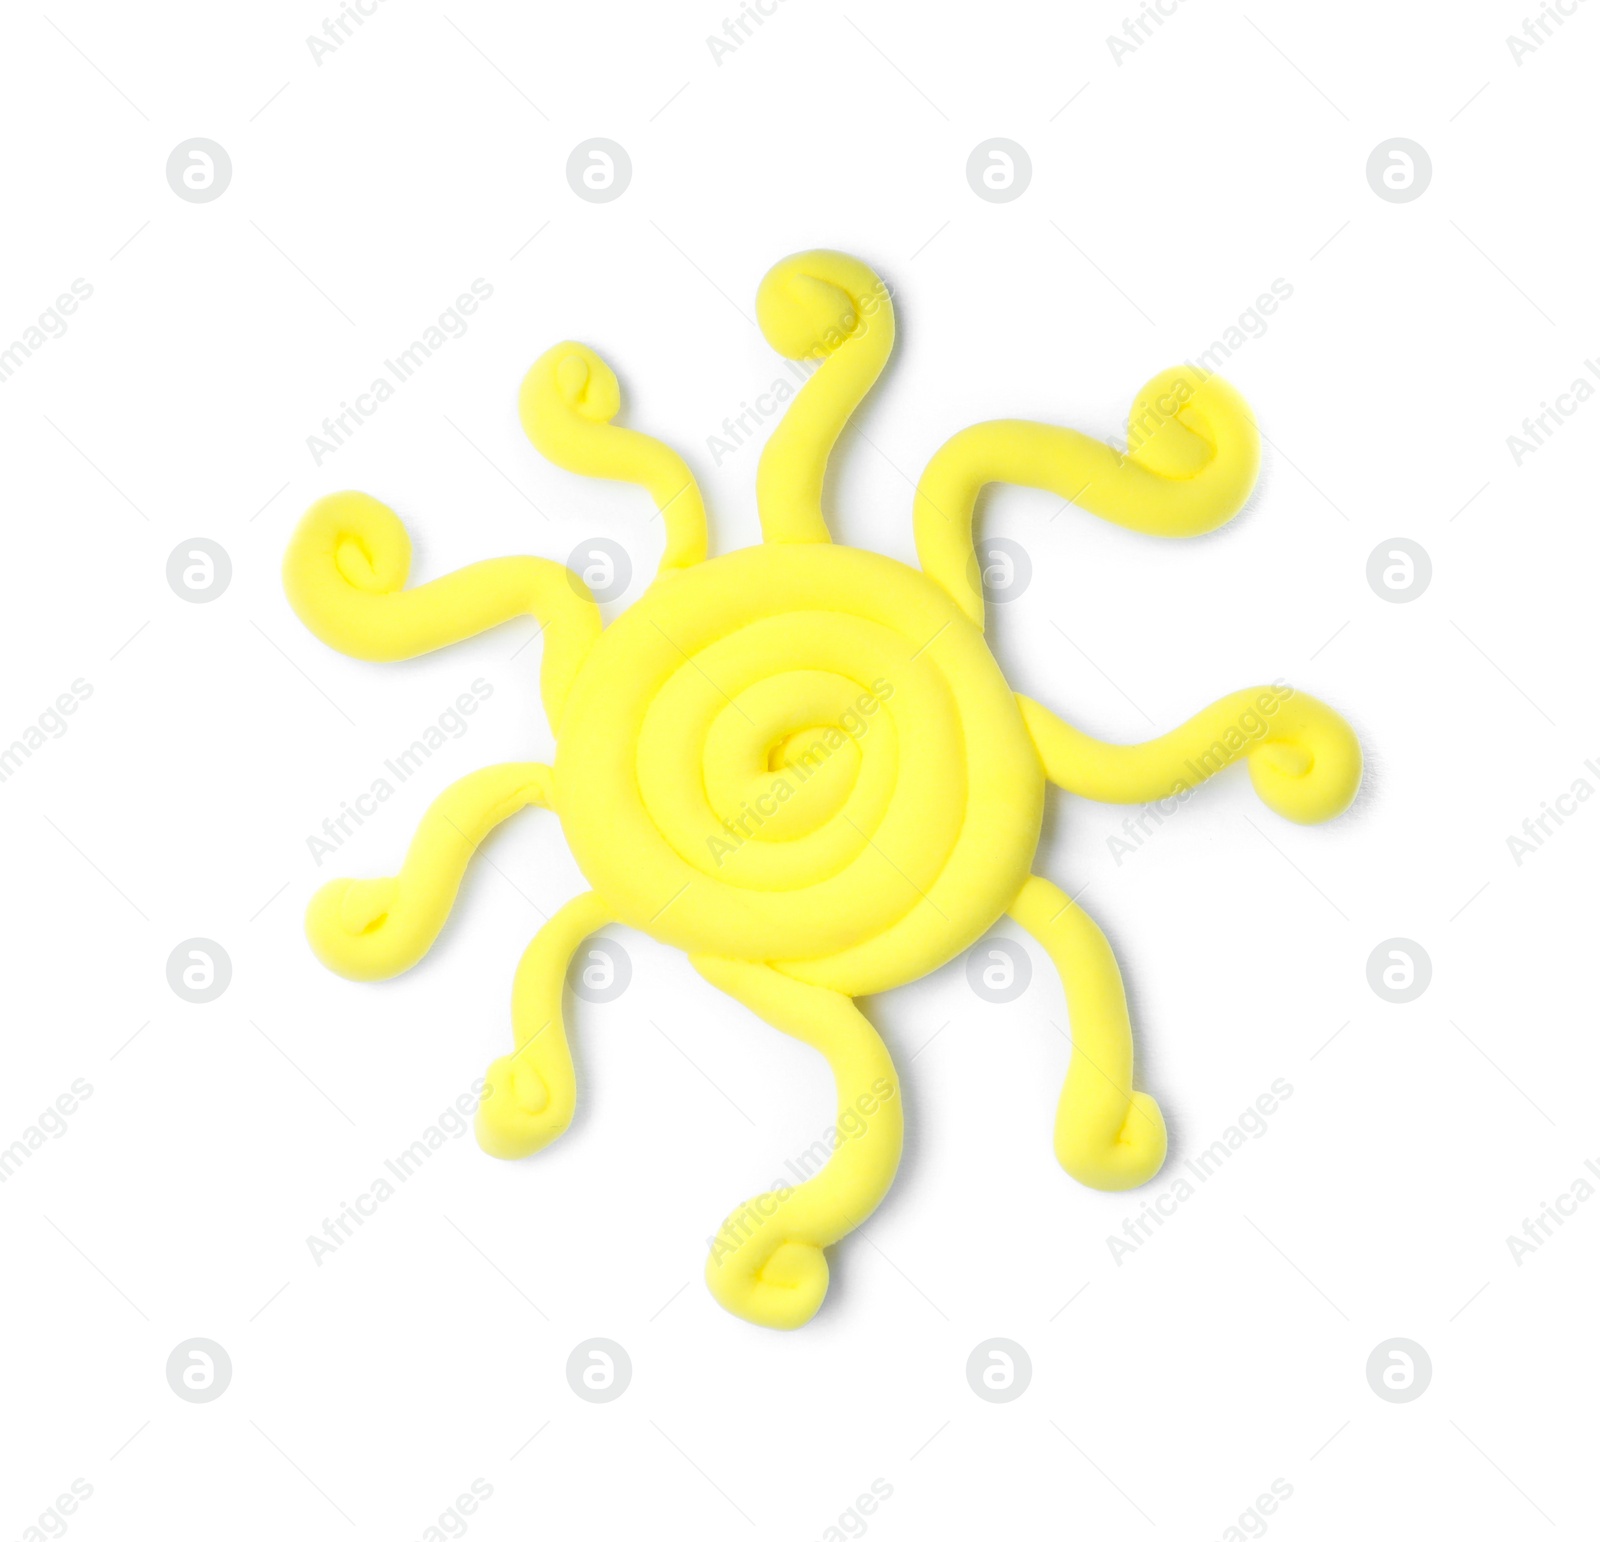 Photo of Yellow sun made from play dough on white background, top view